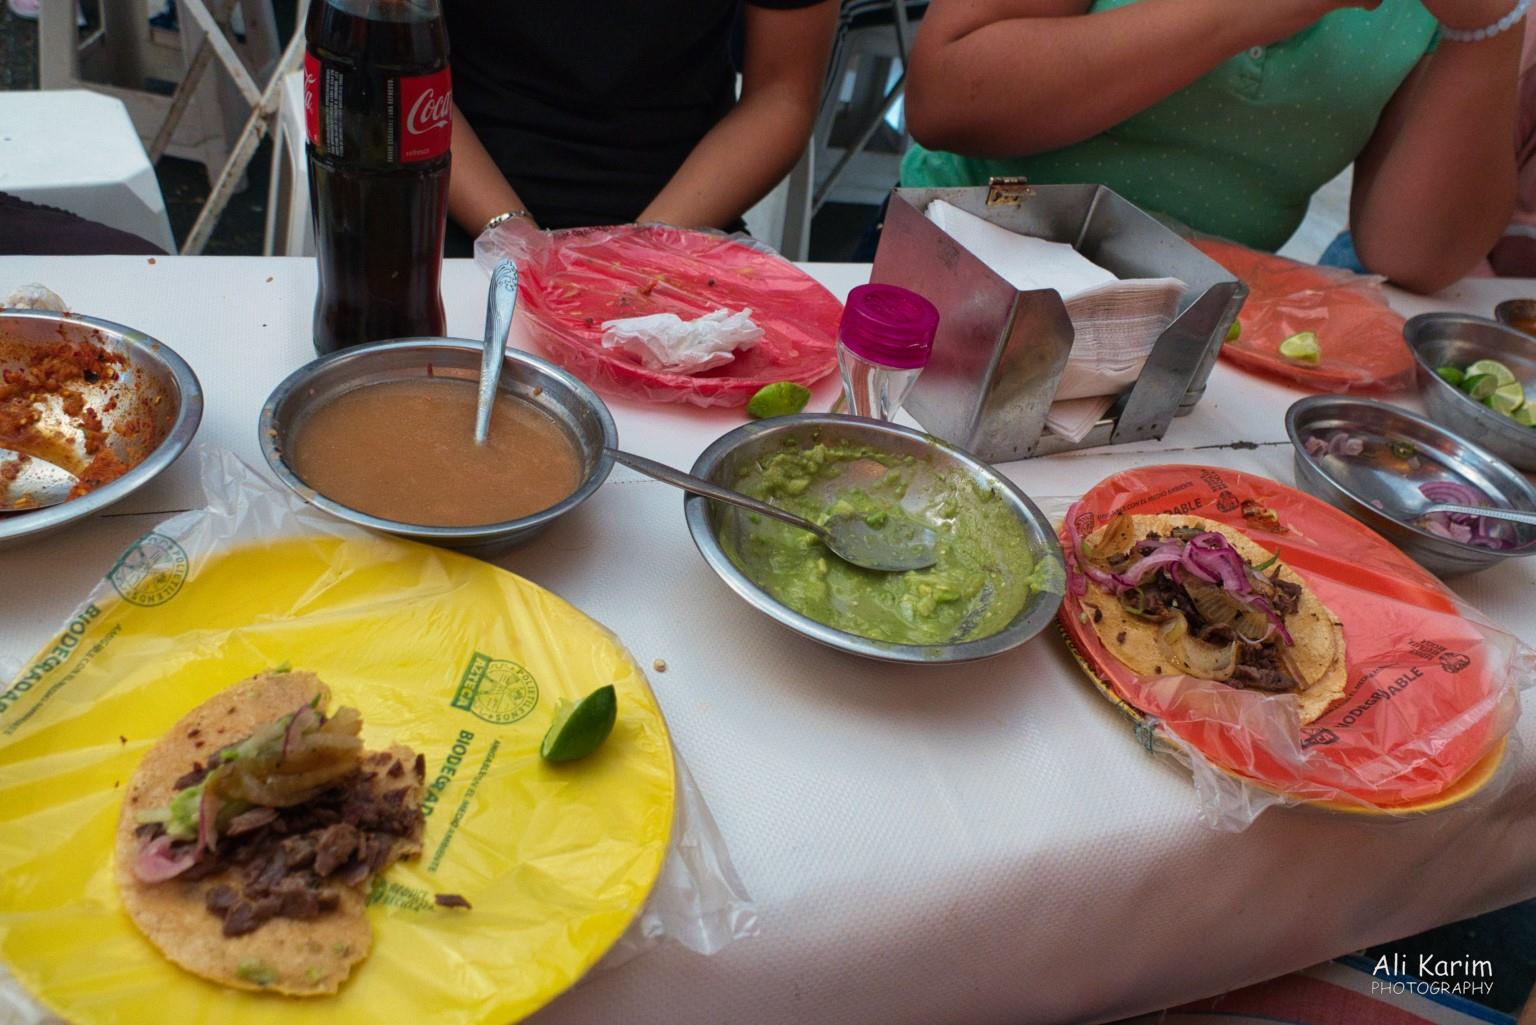 Mexico City, Mexico, Dec 2019, Tacos were served on plates covered in a thin clear plastic bag; the salsa's were quite spicy